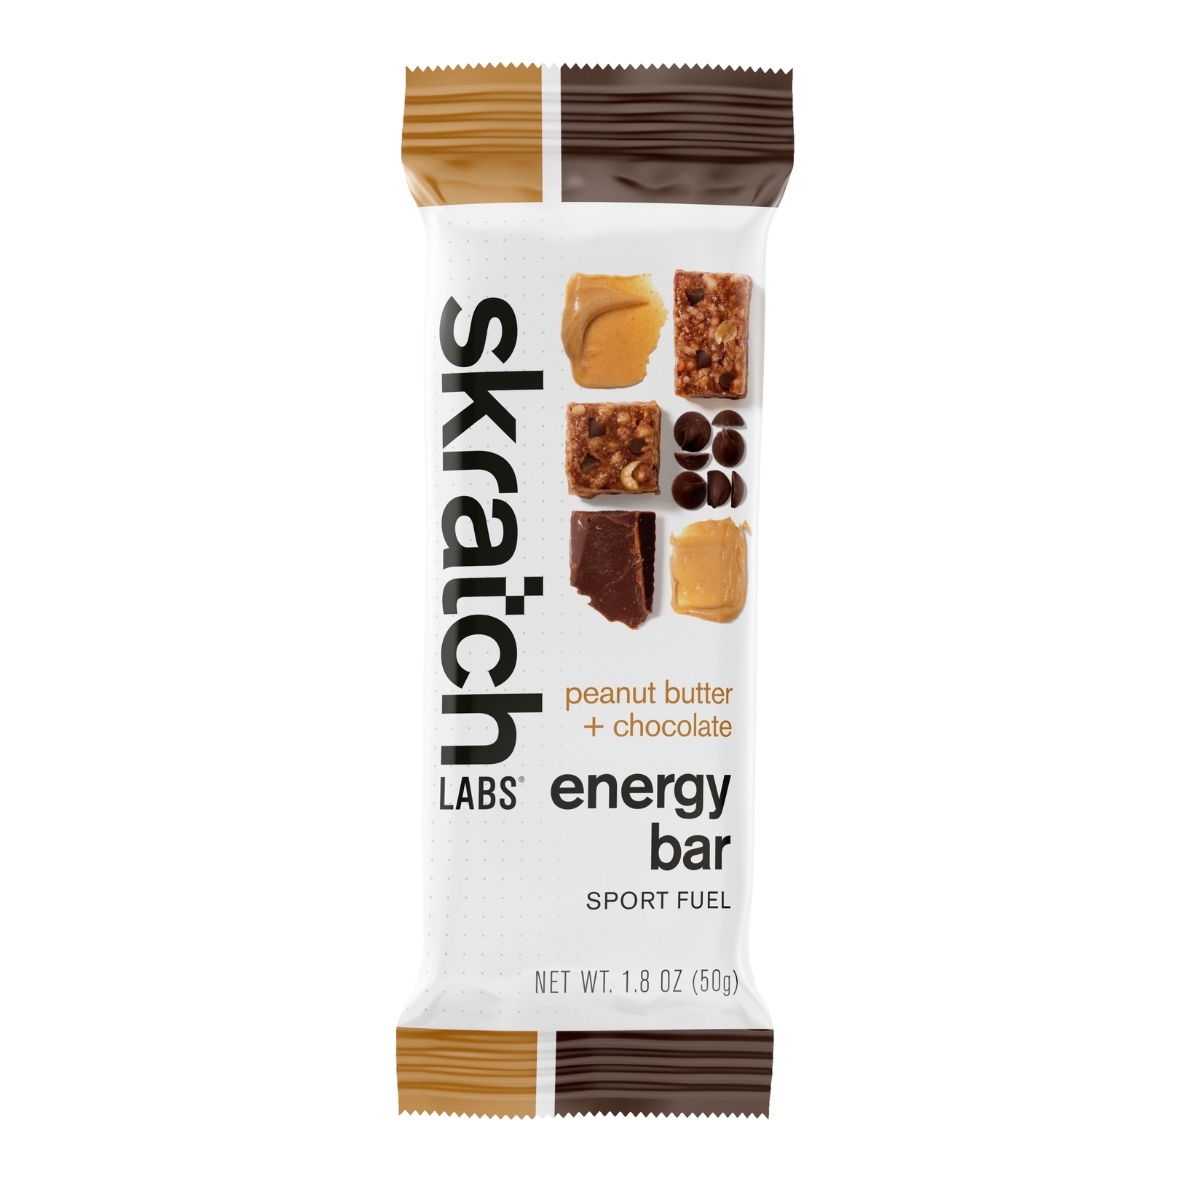 Skratch Labs Anytime Energy Bar – peanut butter and chocolate.